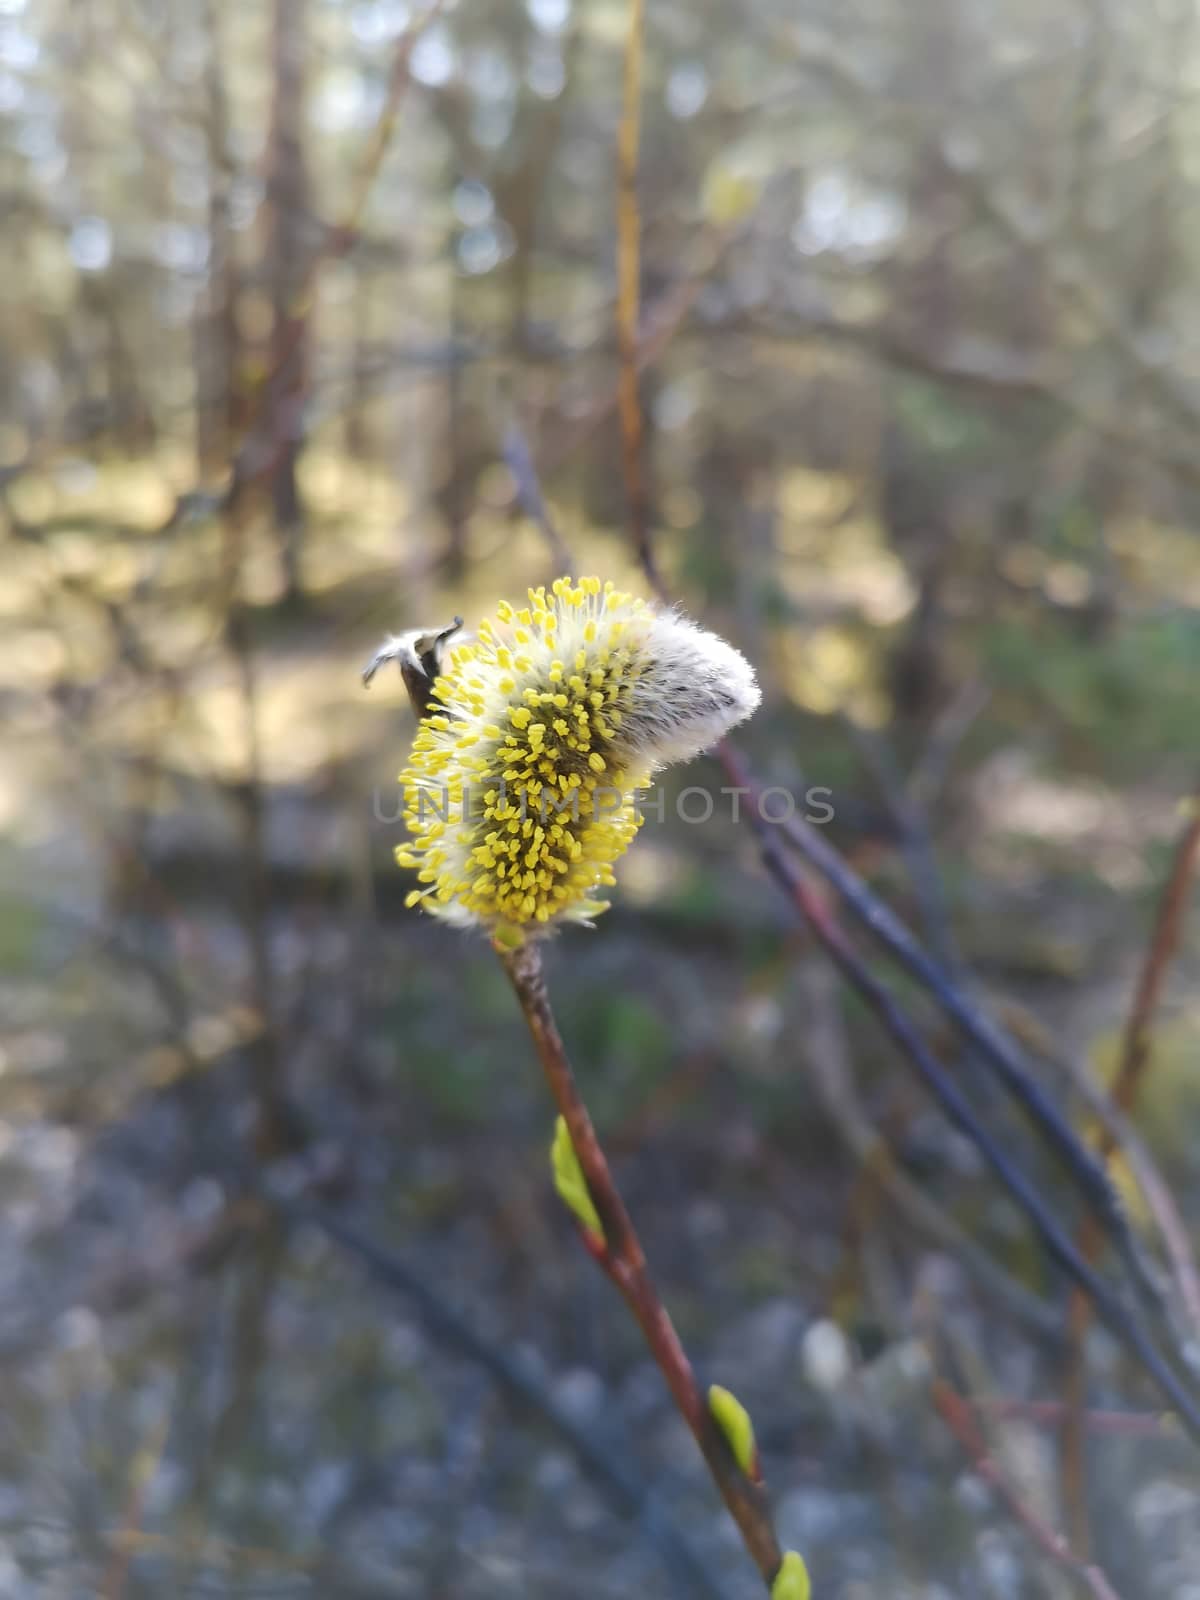 Blooming catkin of a willow, selective focus, blurry background. Salix caprea, goat willow, pussy willow or great sallow